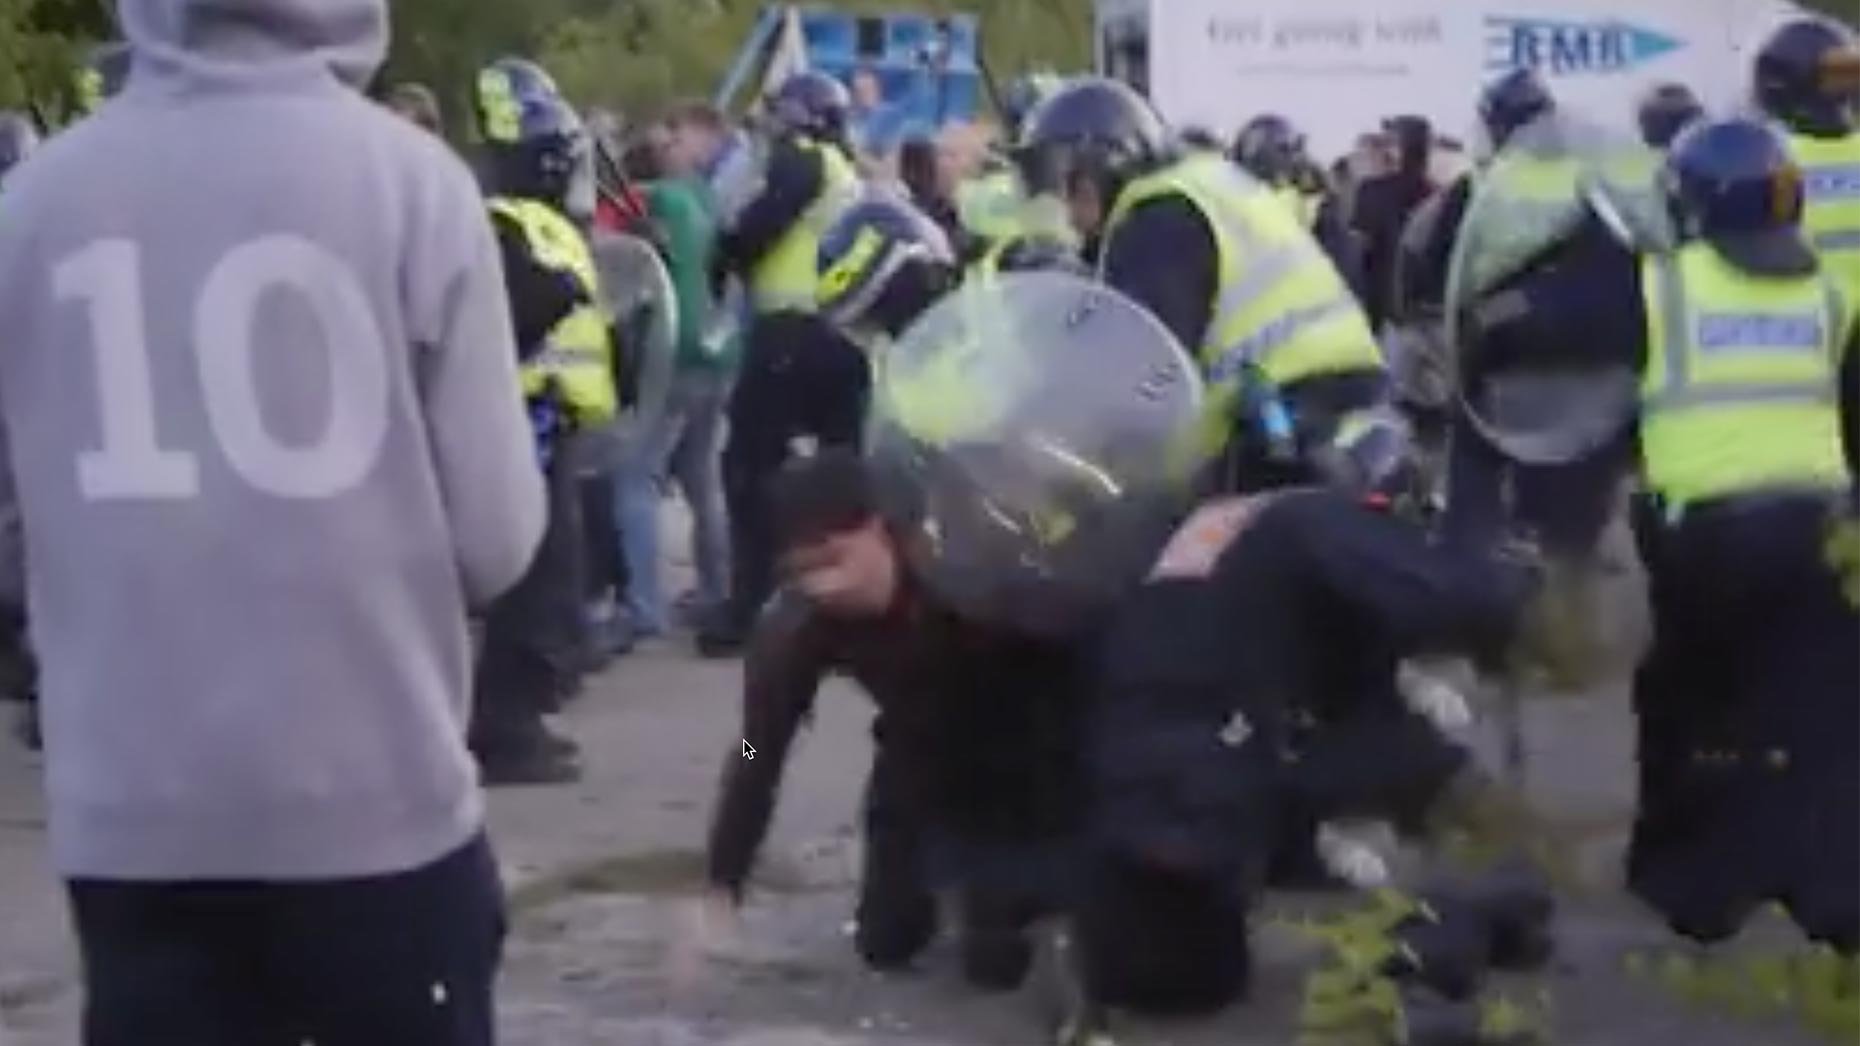 Throughout the night, the police are shown trying to push back the line of people at the illegal rave, with continued taunts and bottles thrown from the crowd. Screenshot: Chris Shaw